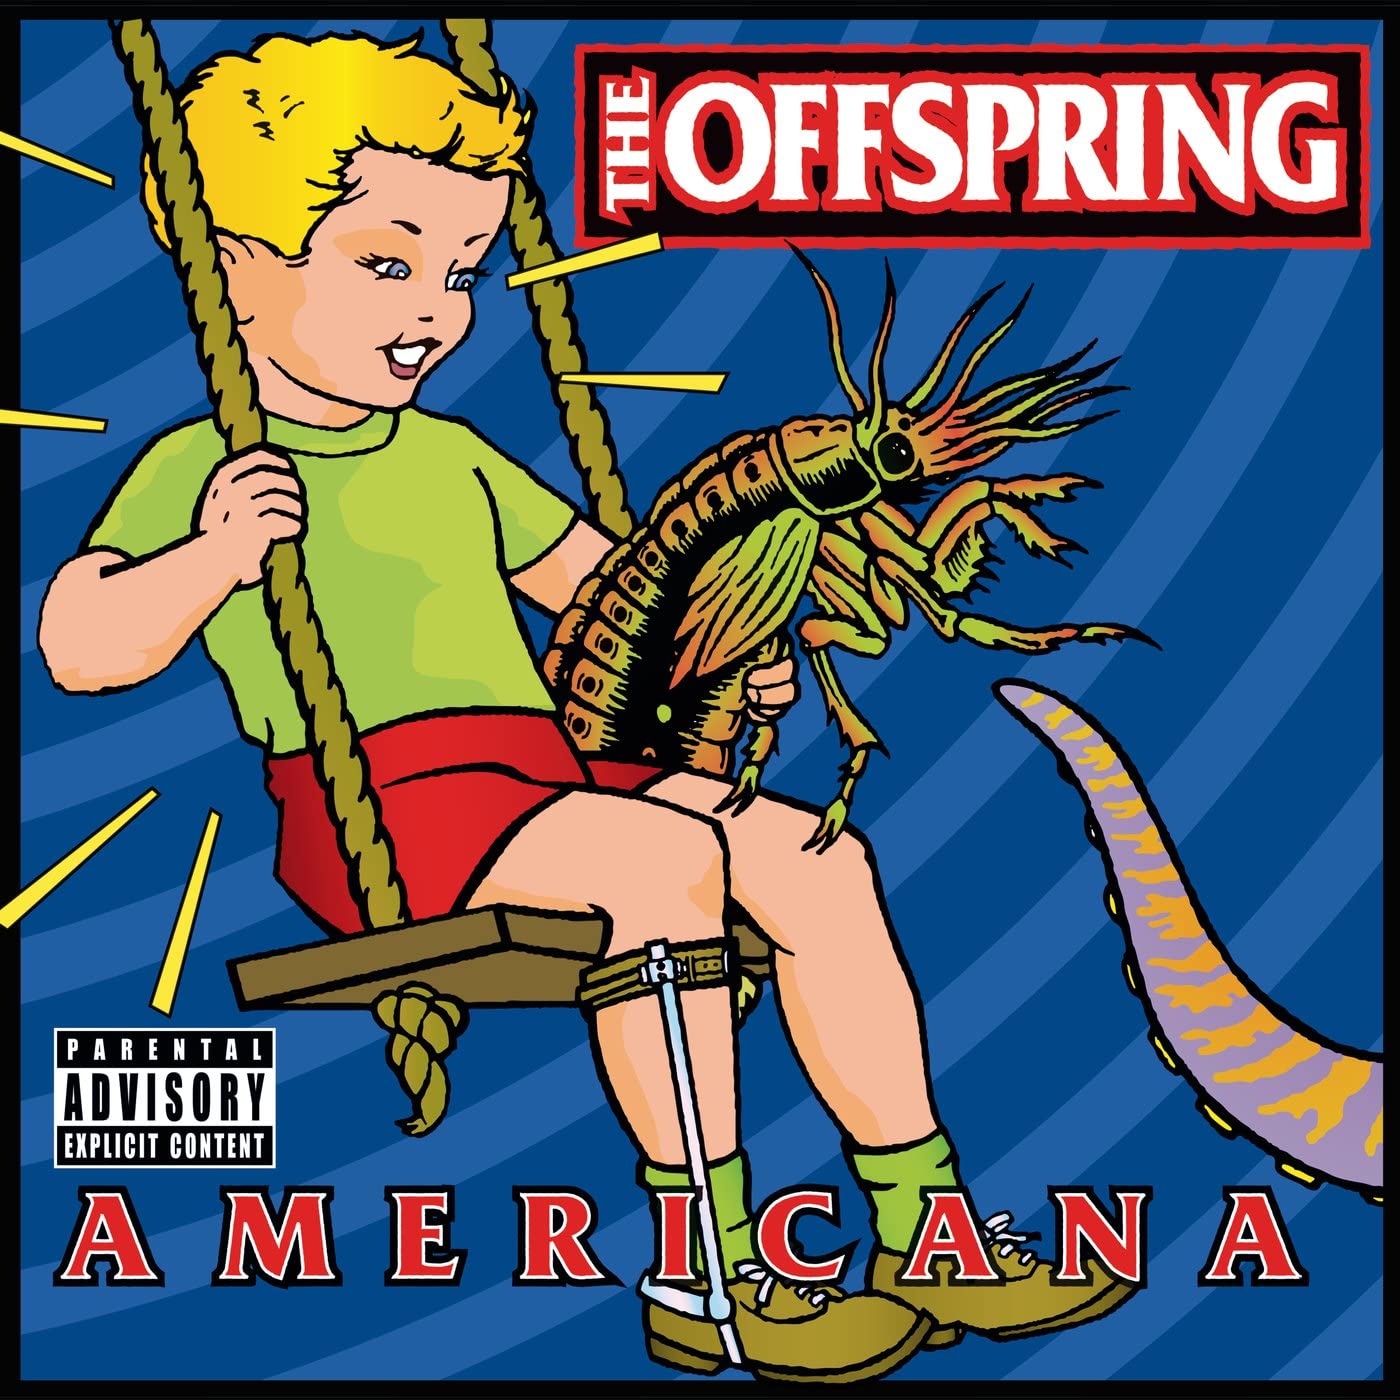 Fifth studio album on Vinyl by The Offspring. 'Americana' was a major success, debuting at number six on the US Billboard 200 and spawning the hit single 'Pretty Fly (for a White Guy)'